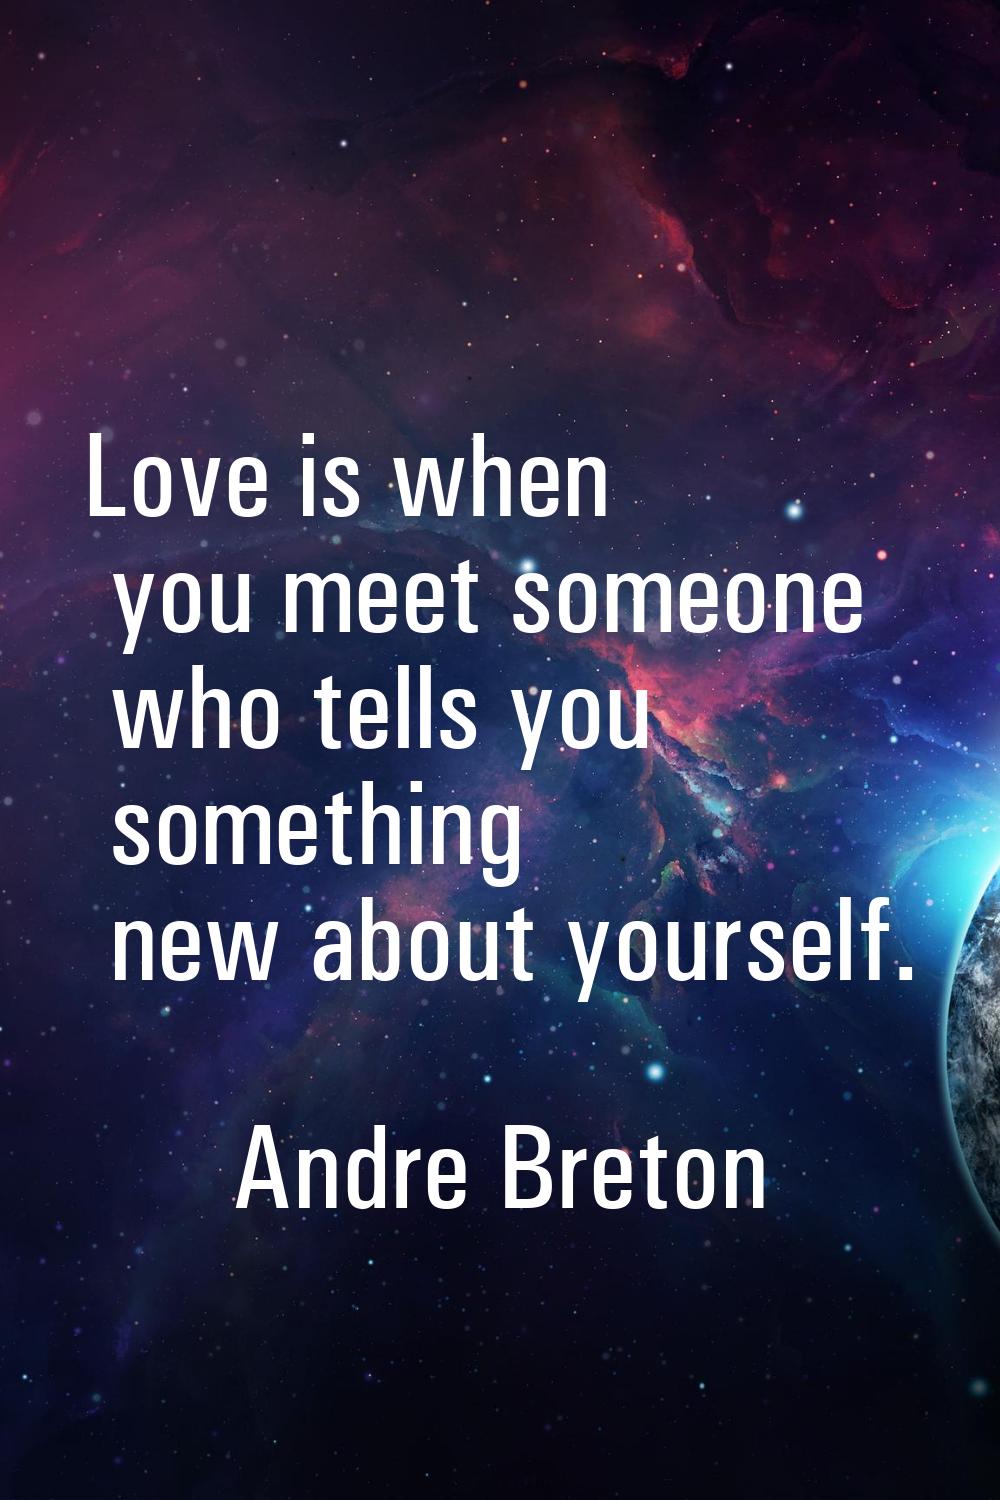 Love is when you meet someone who tells you something new about yourself.